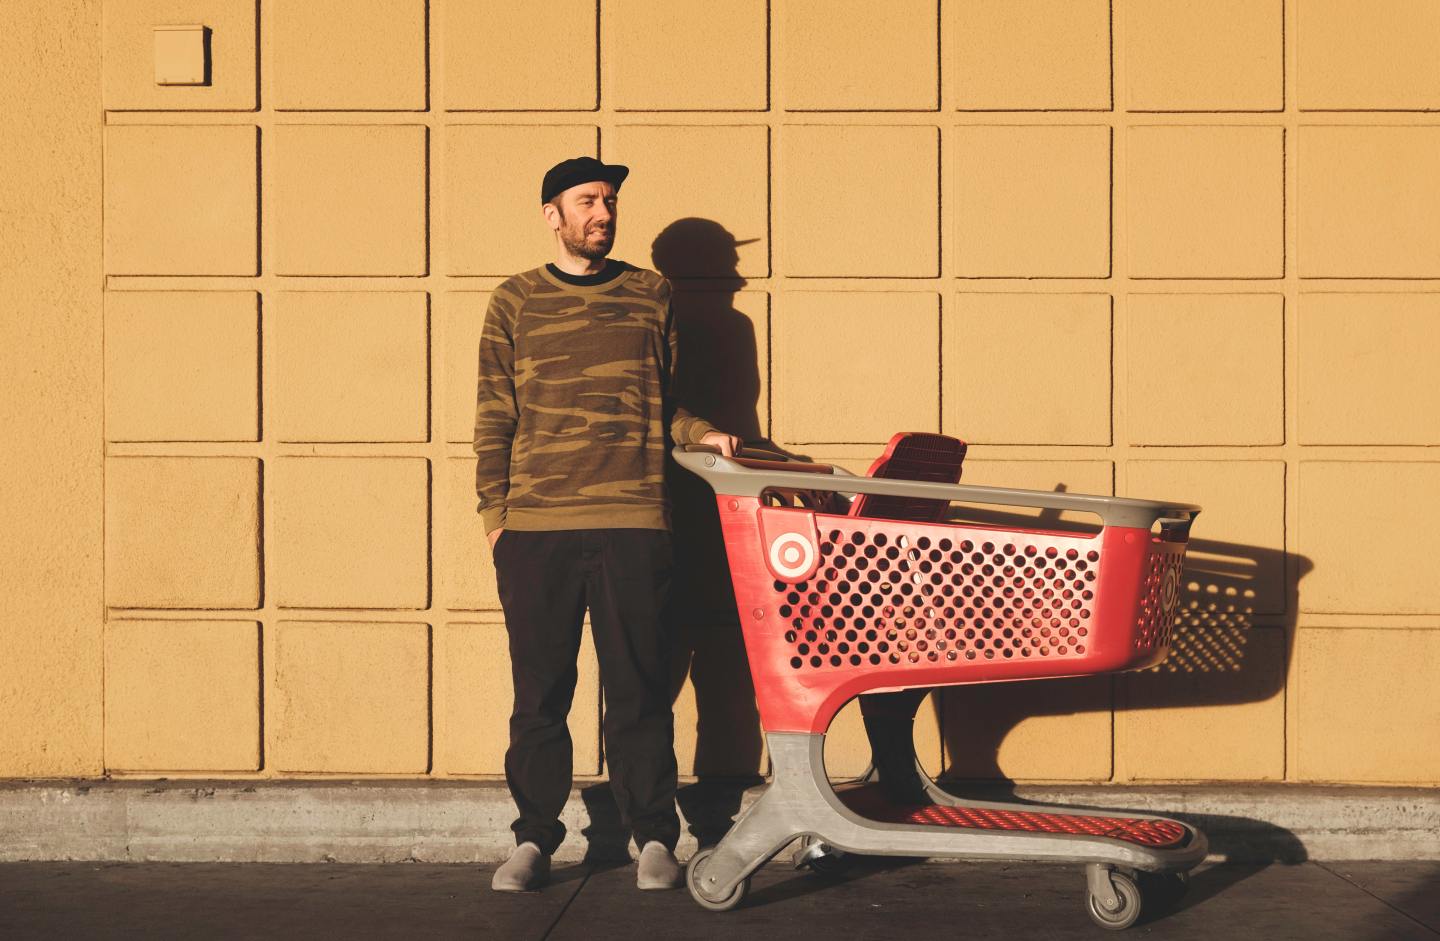 picture of man with Target grocery cart - article on sustainability initiatives at big box stores